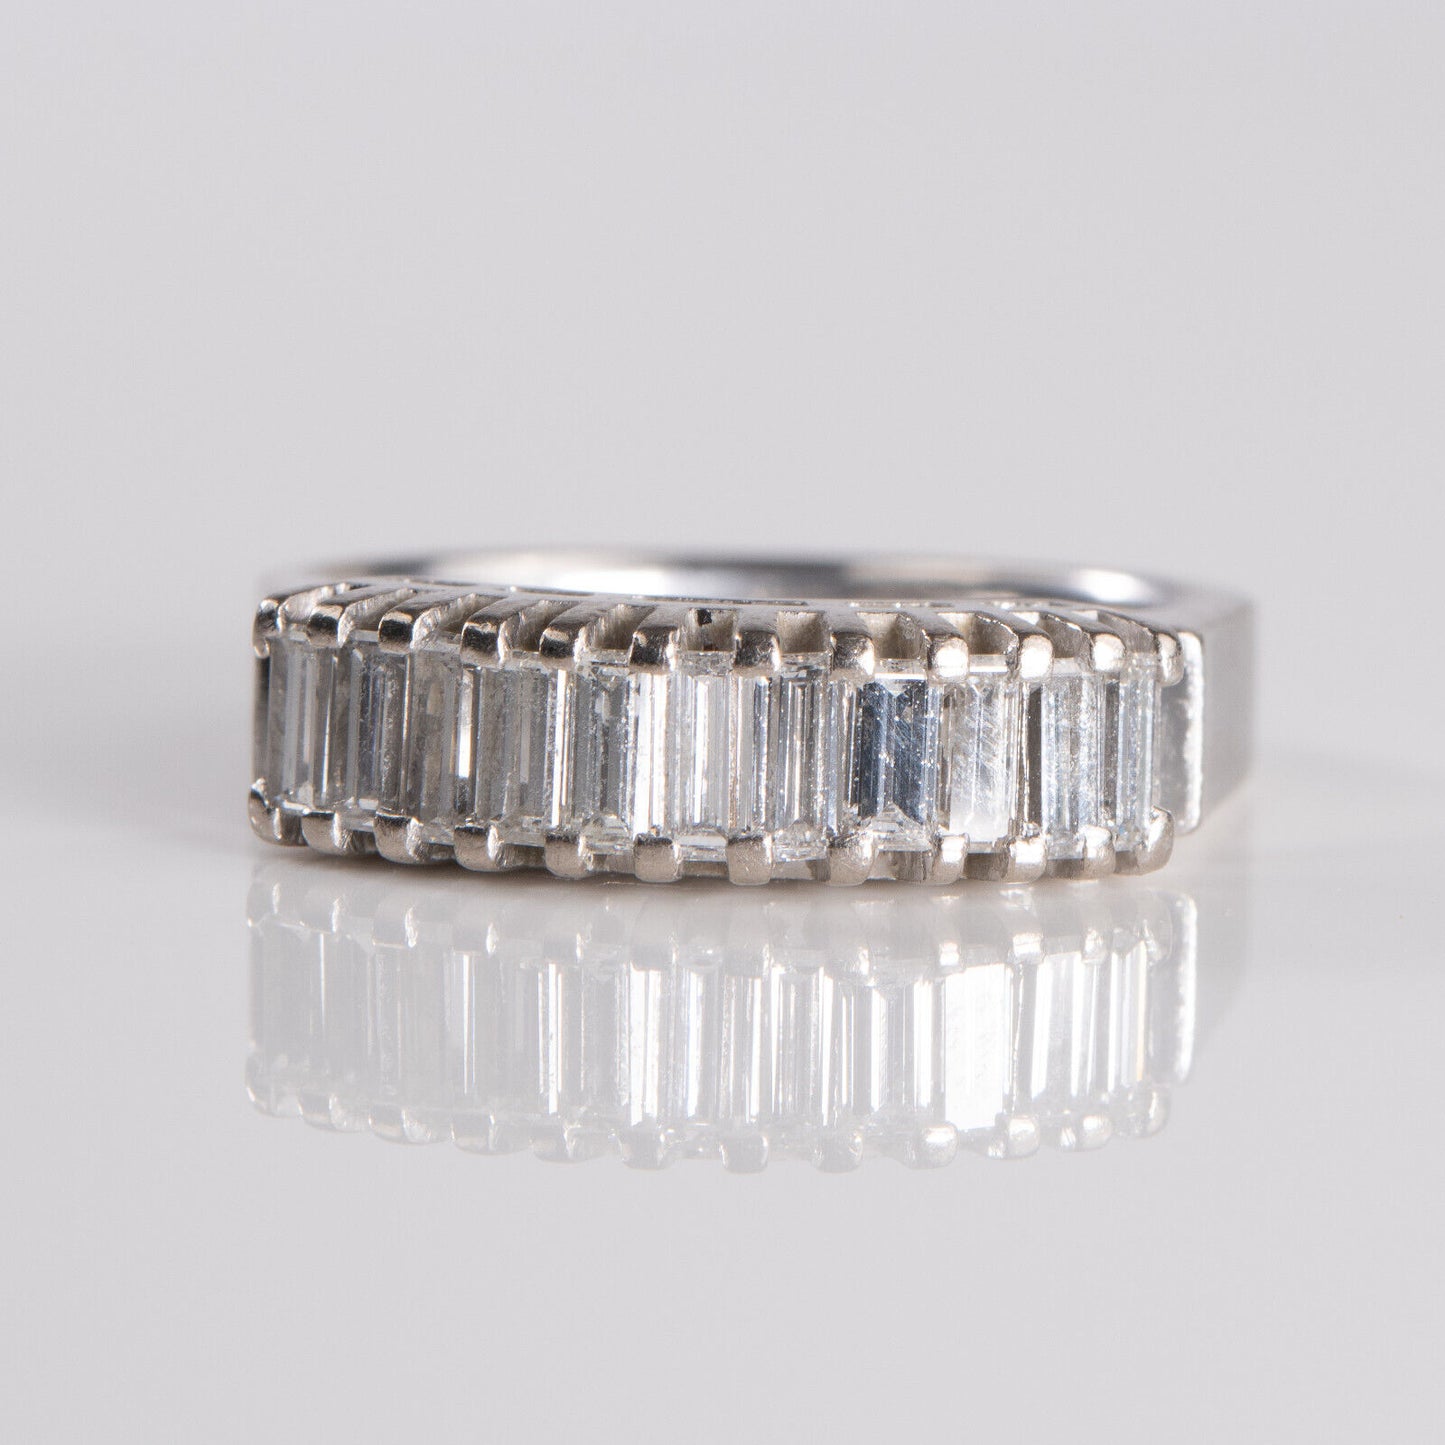 White Gold Baguette Cut Diamond Ring (Appraisal Included)